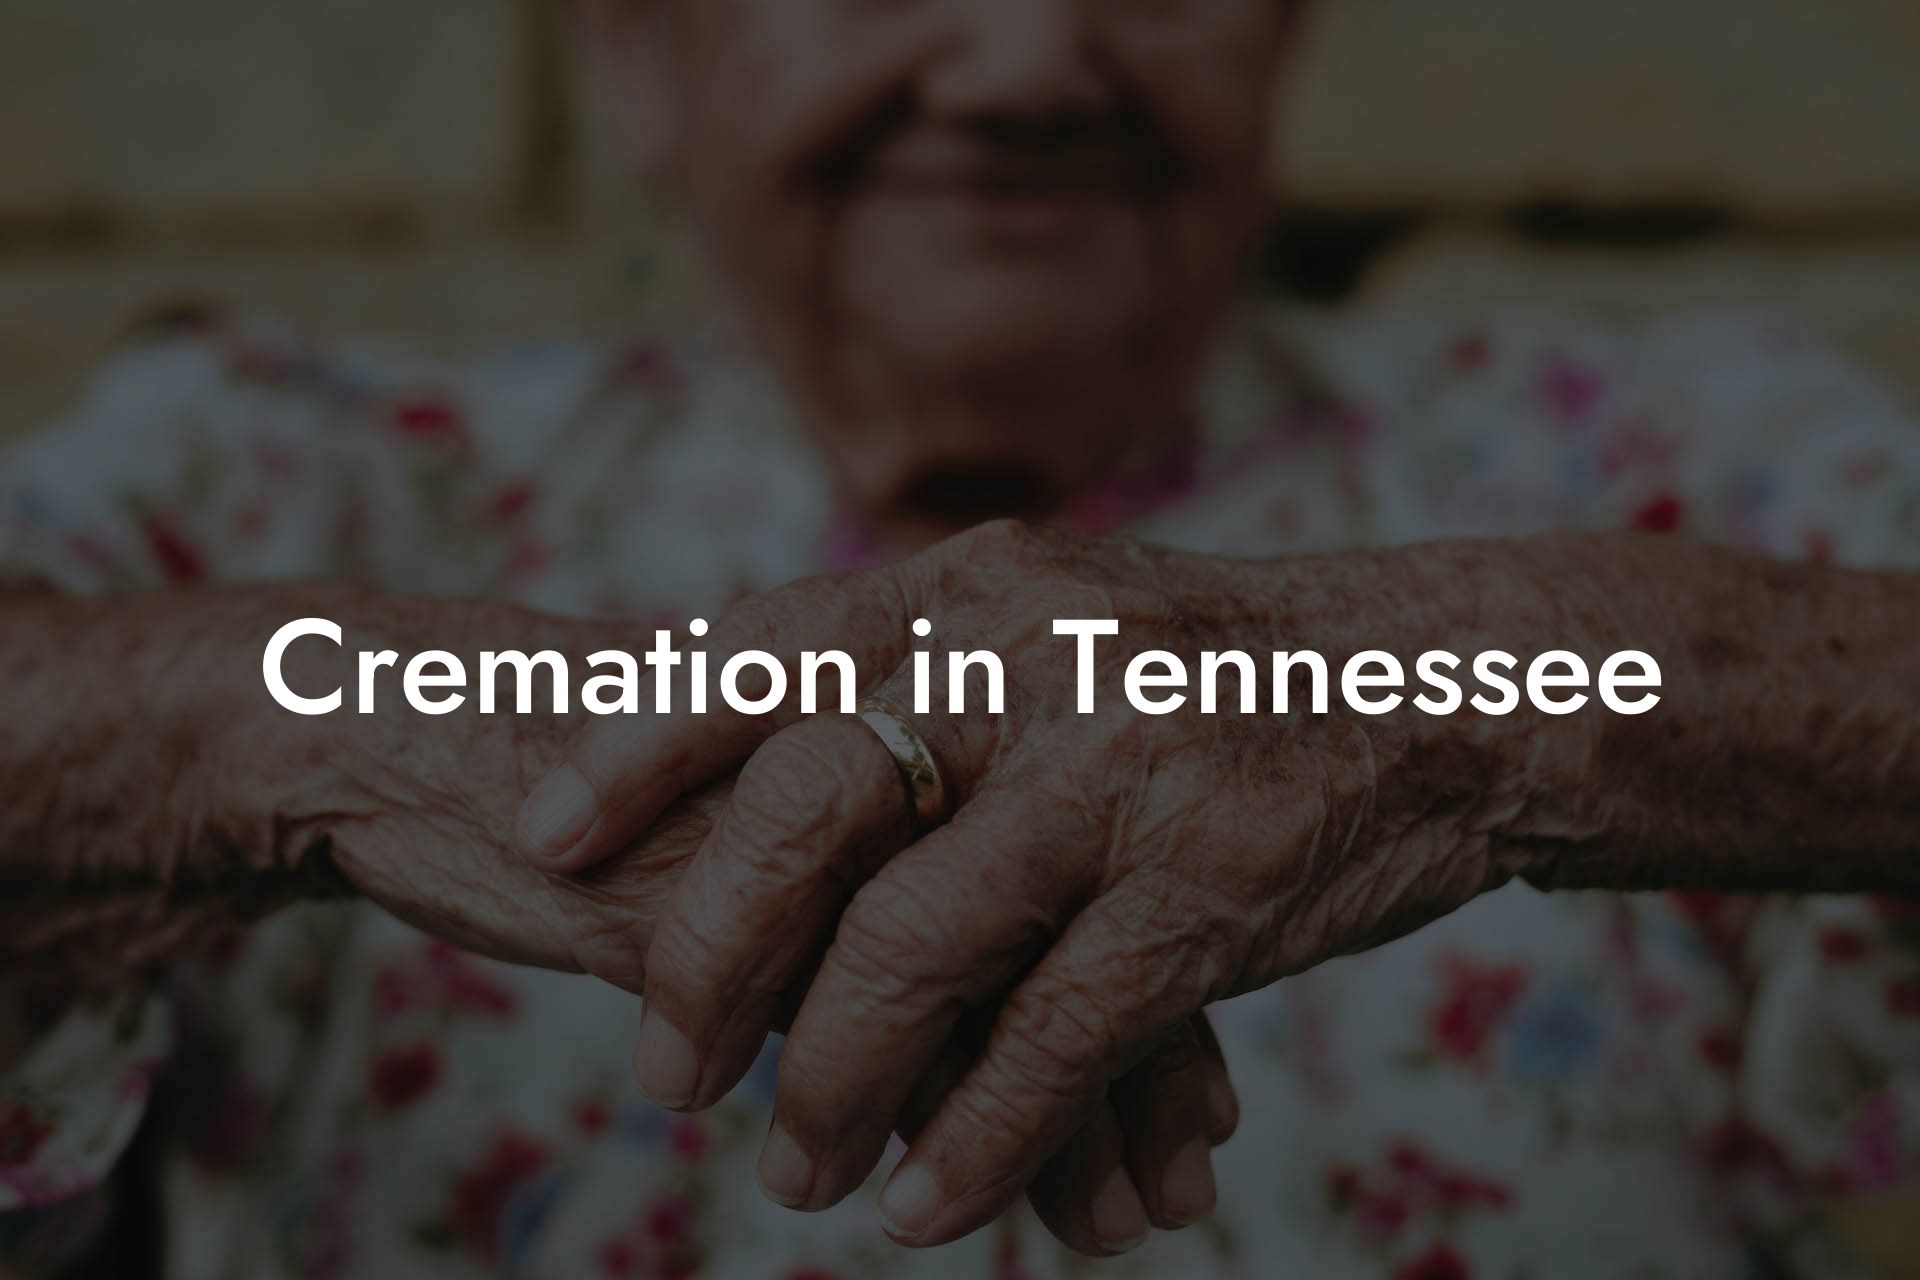 Cremation in Tennessee